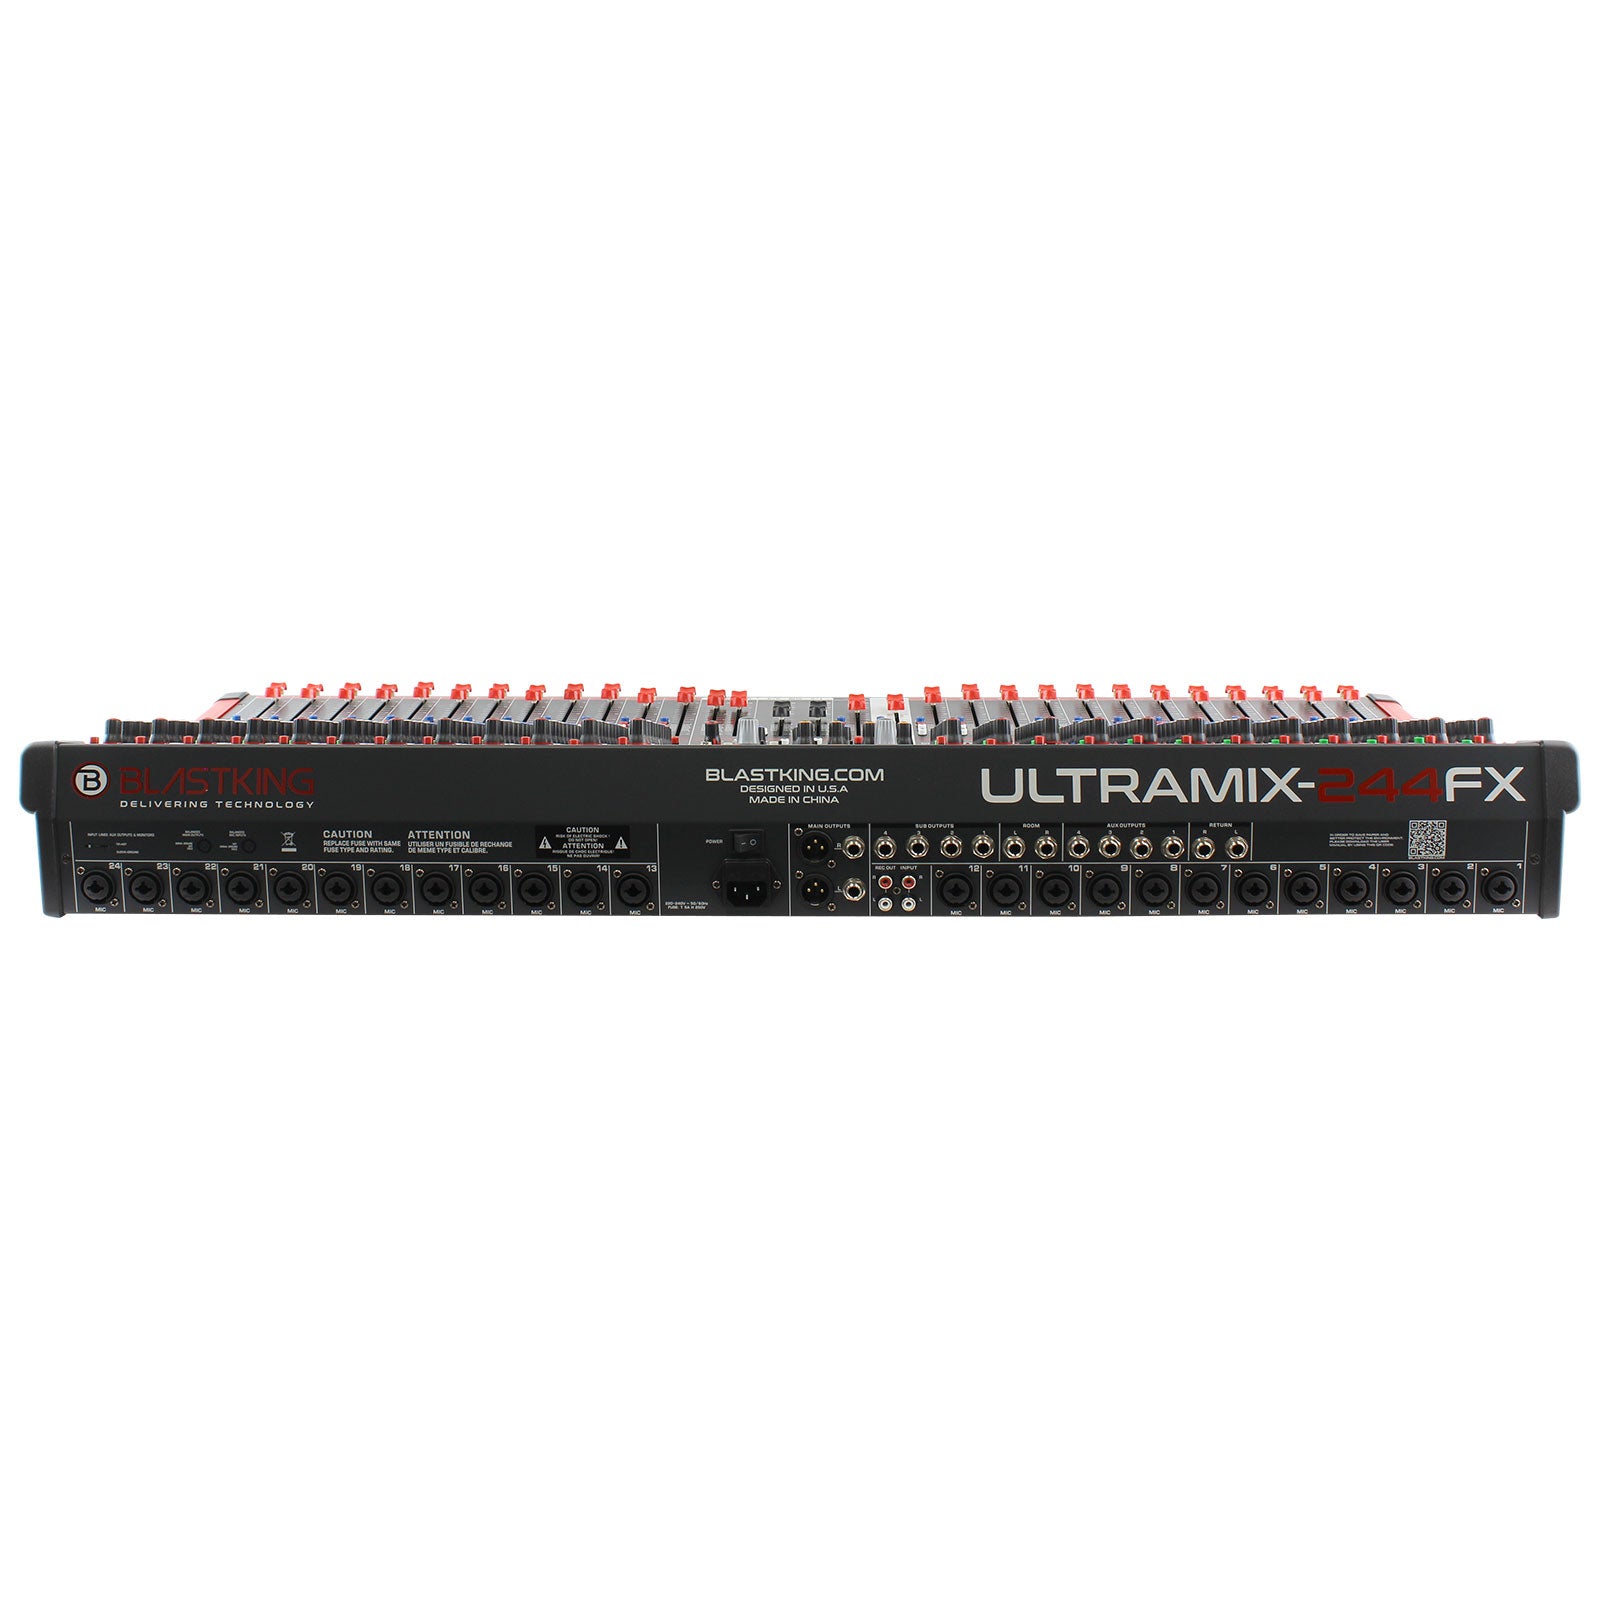 Blastking ULTRAMIX-244FX 24 Channel Analog Stereo Mixing Console